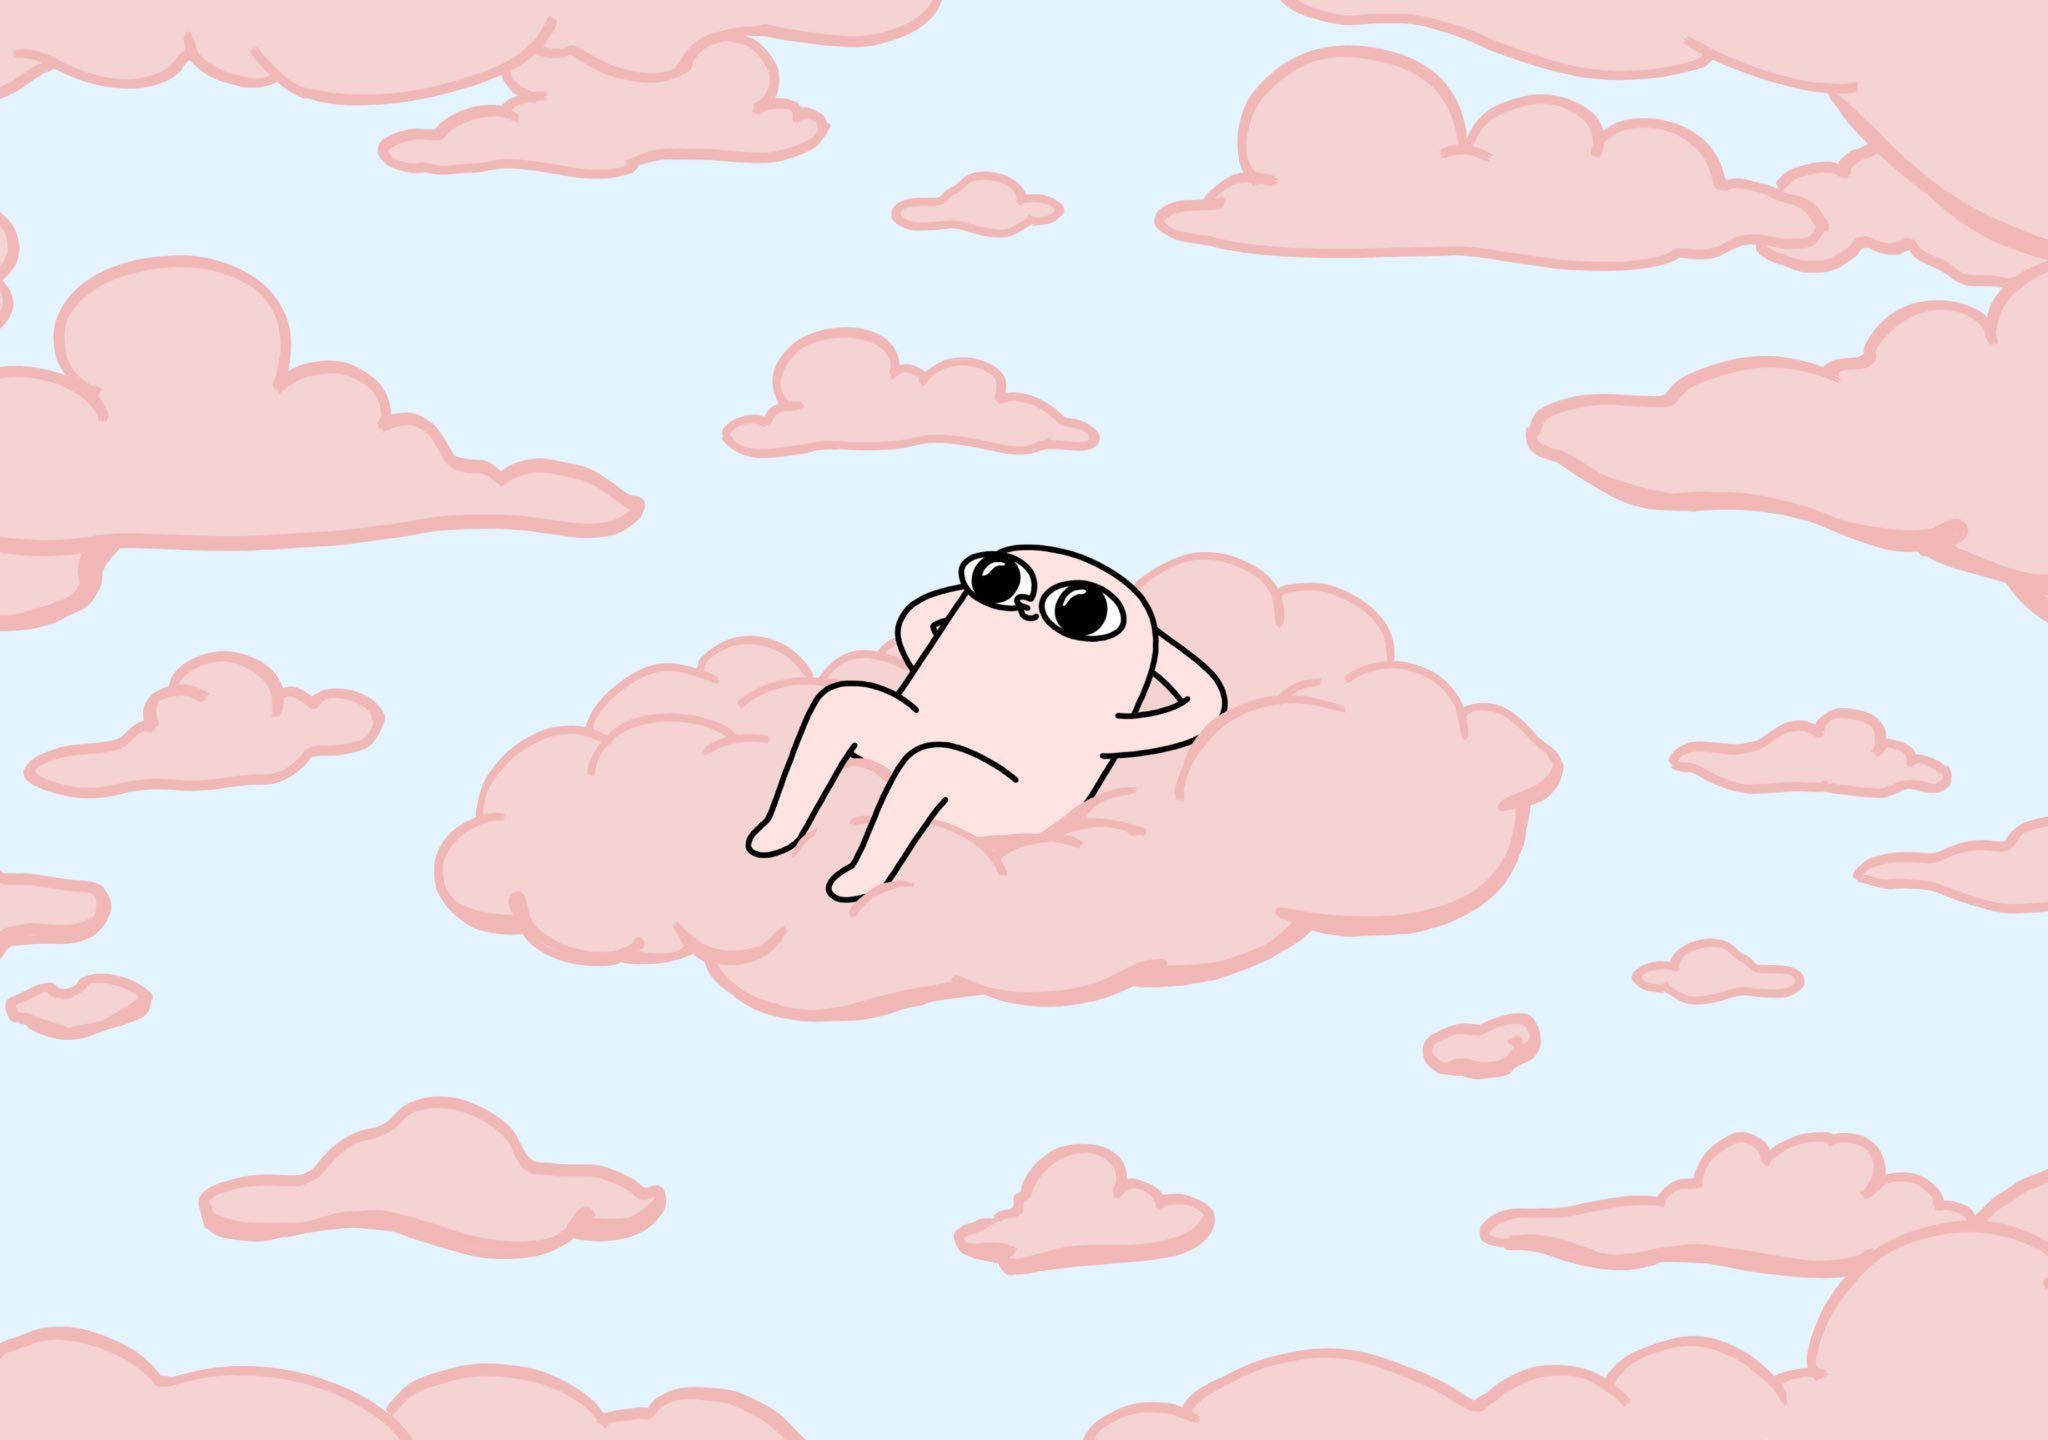 Ketnipz Chilling On Pink Clouds Pinterest Aesthetic Wallpaper